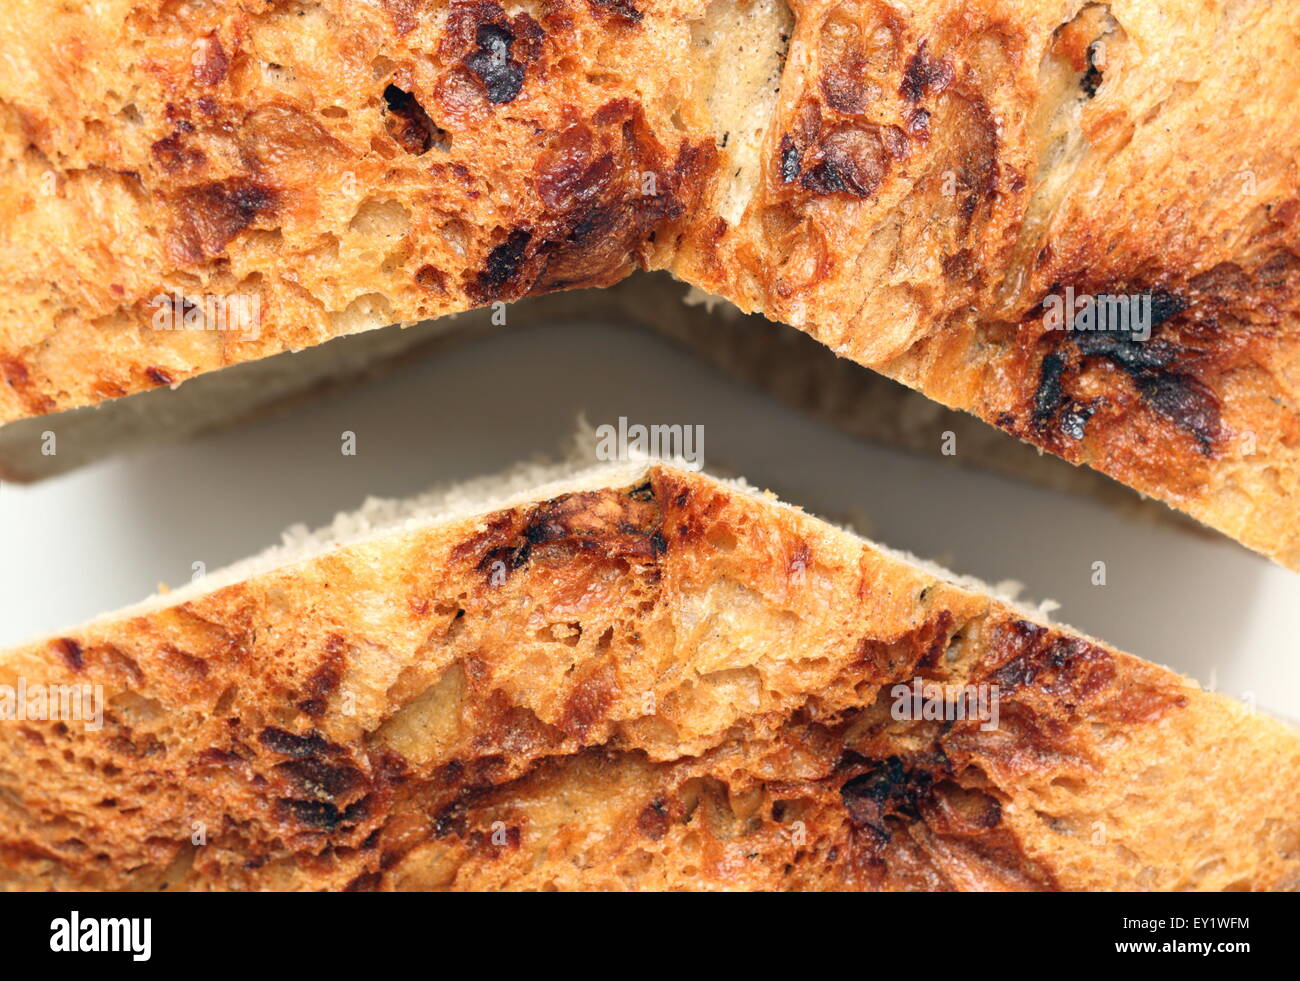 detail of romanian homemade bread cut in two pieces on a white table Stock Photo